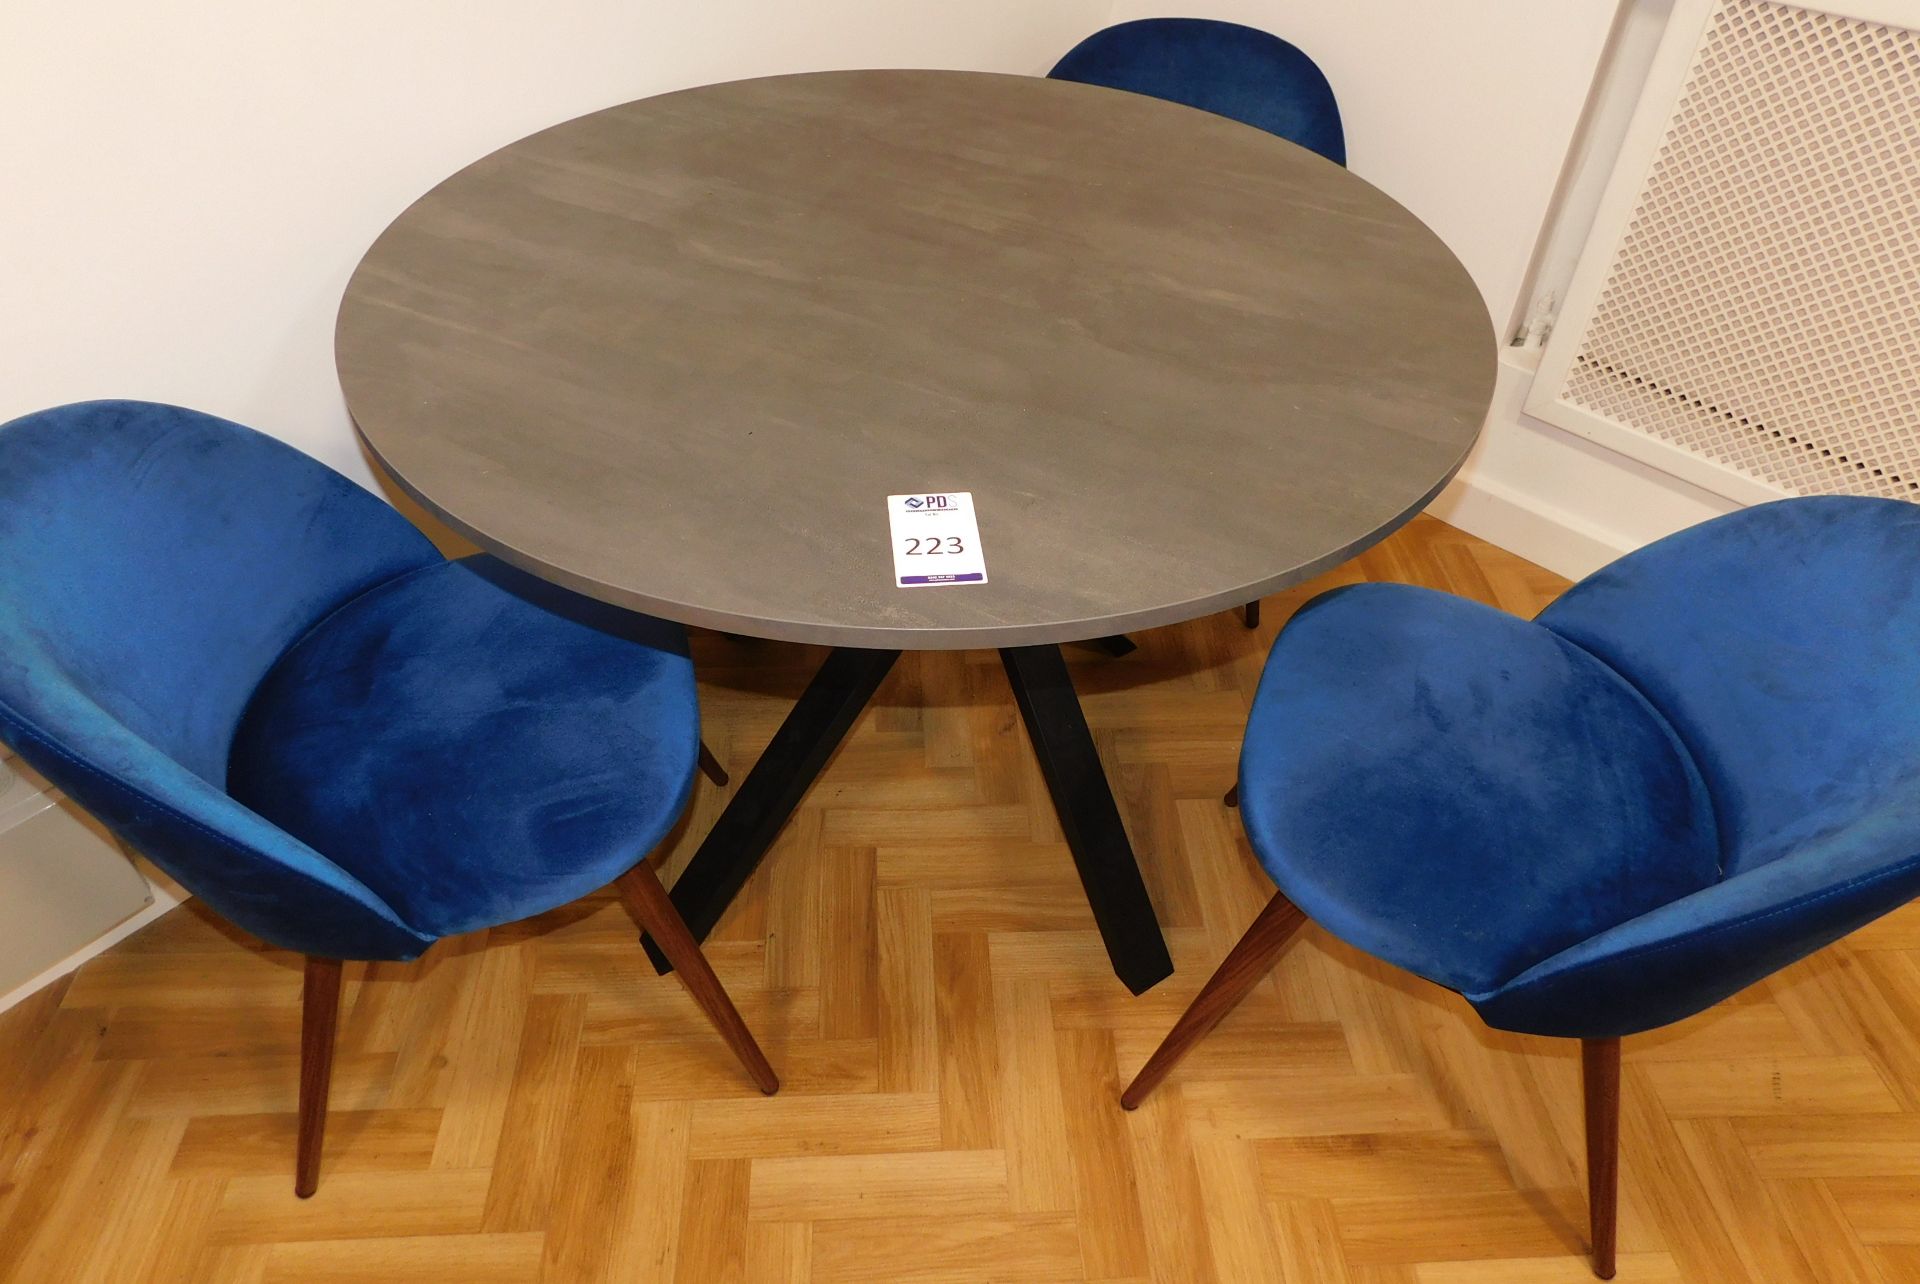 Circular Meeting Table, 1,050mm, 3 Blue Suede Effect Chairs & White Laminate Table (Location: - Bild 2 aus 3